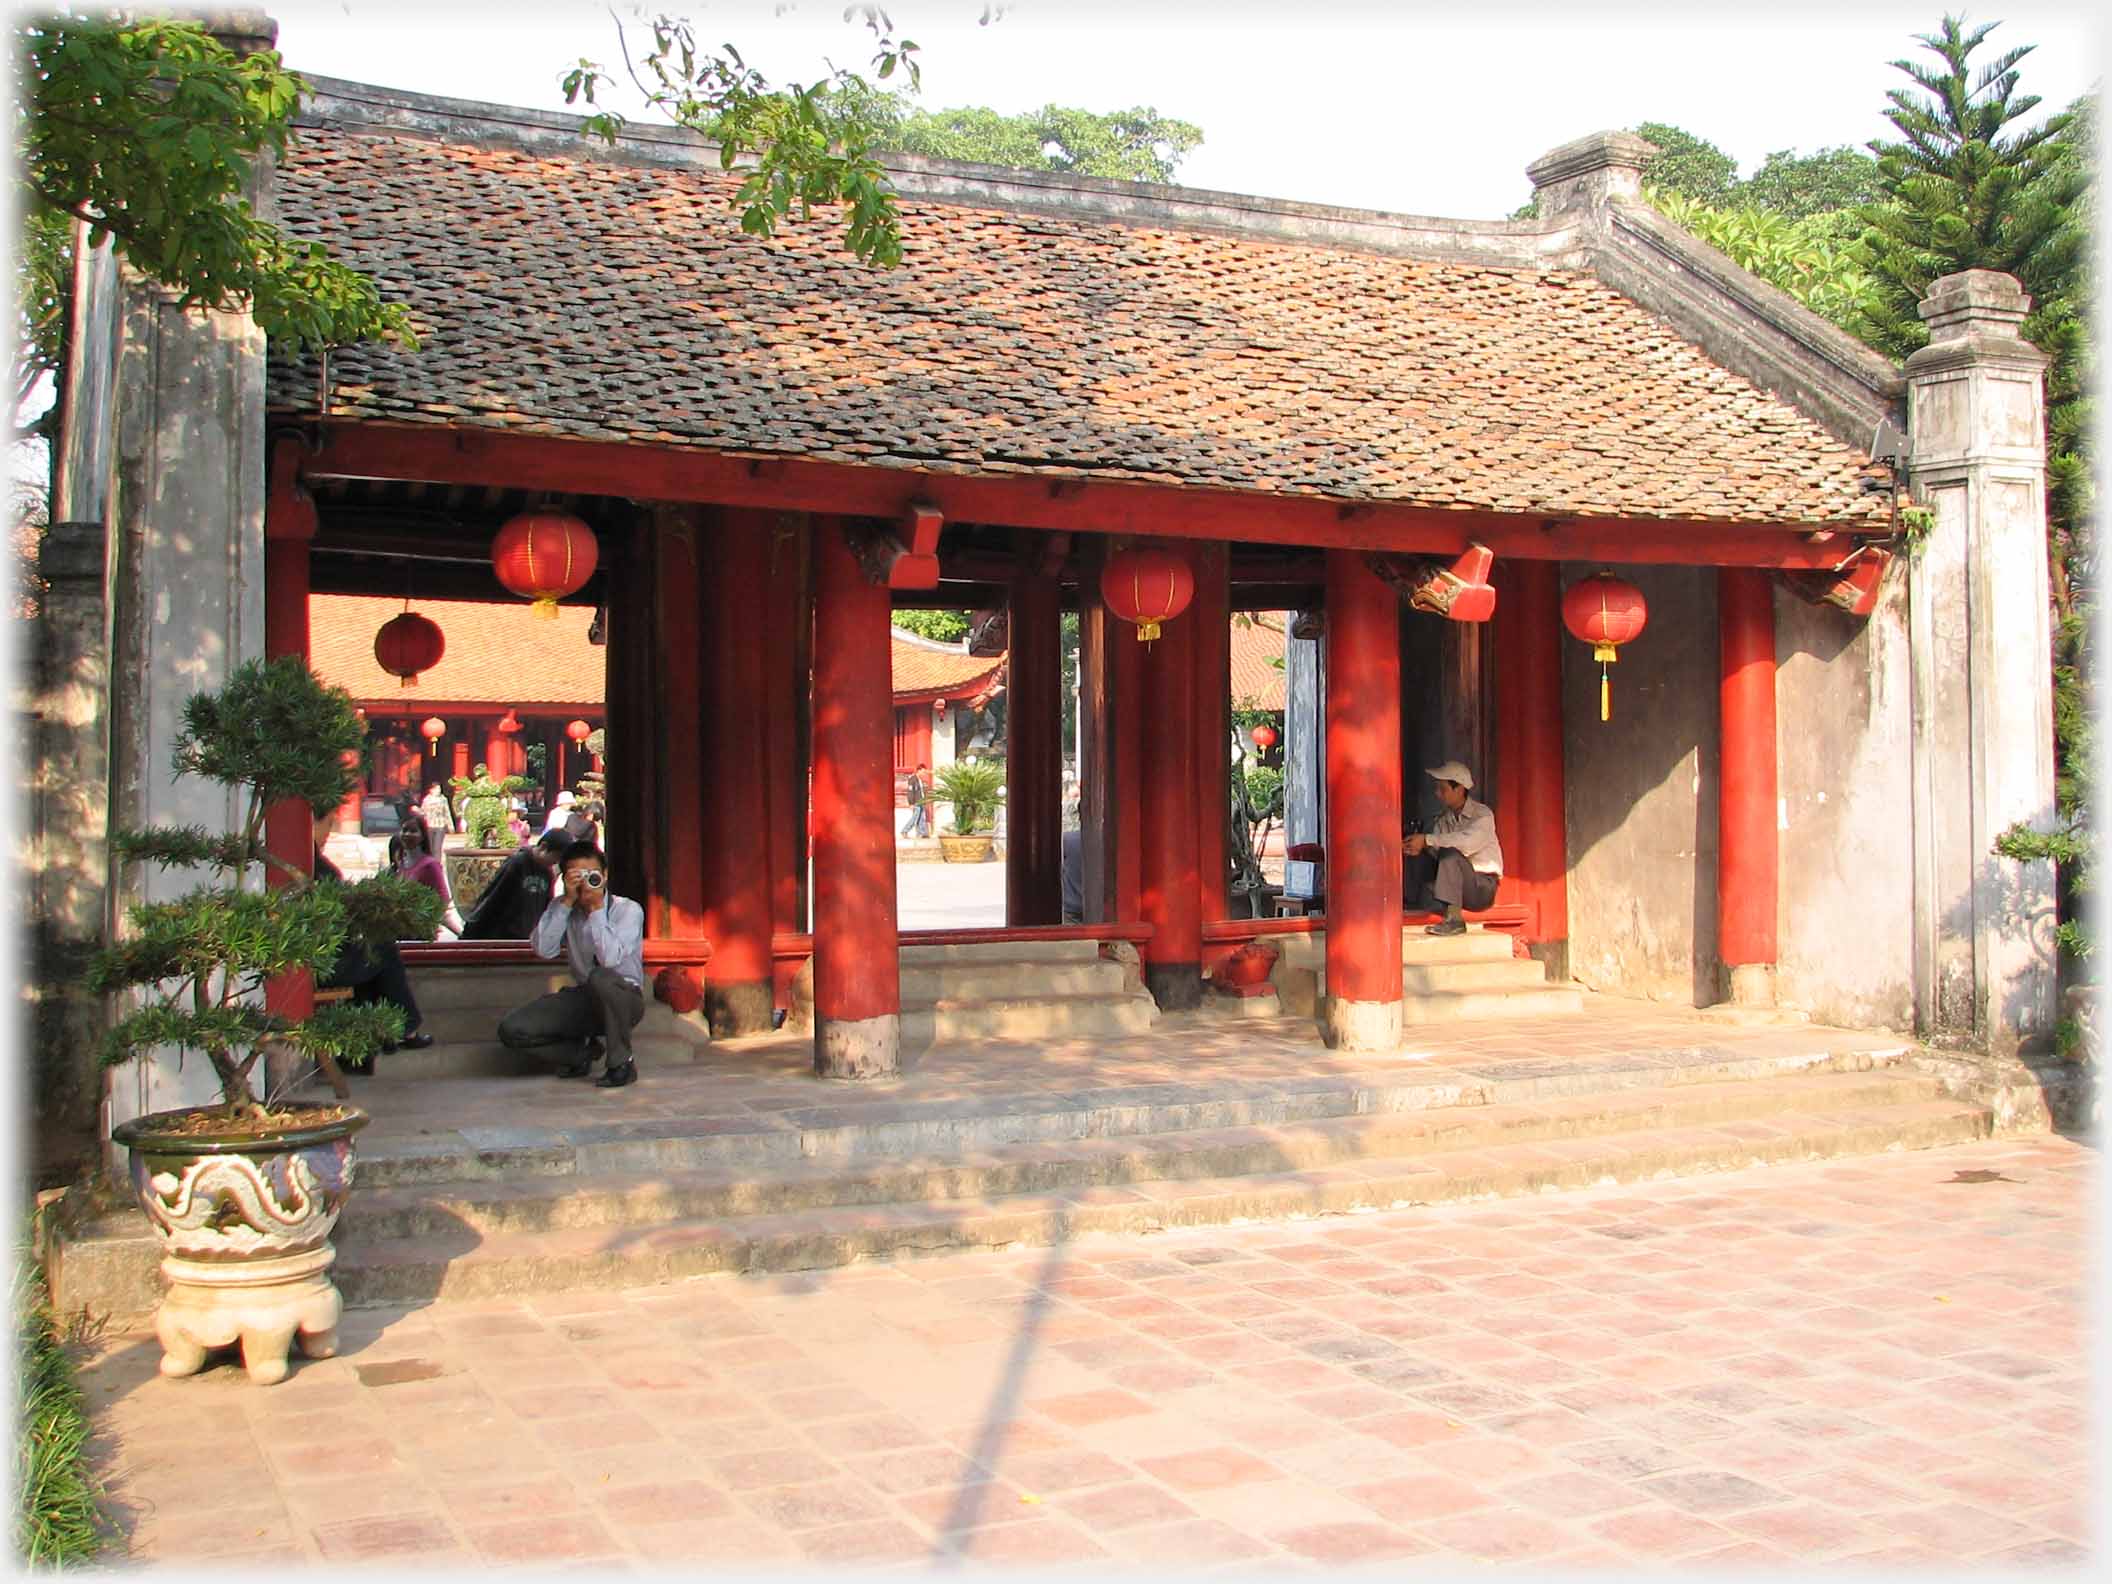 Small pavilion with red pillars and lanterns.